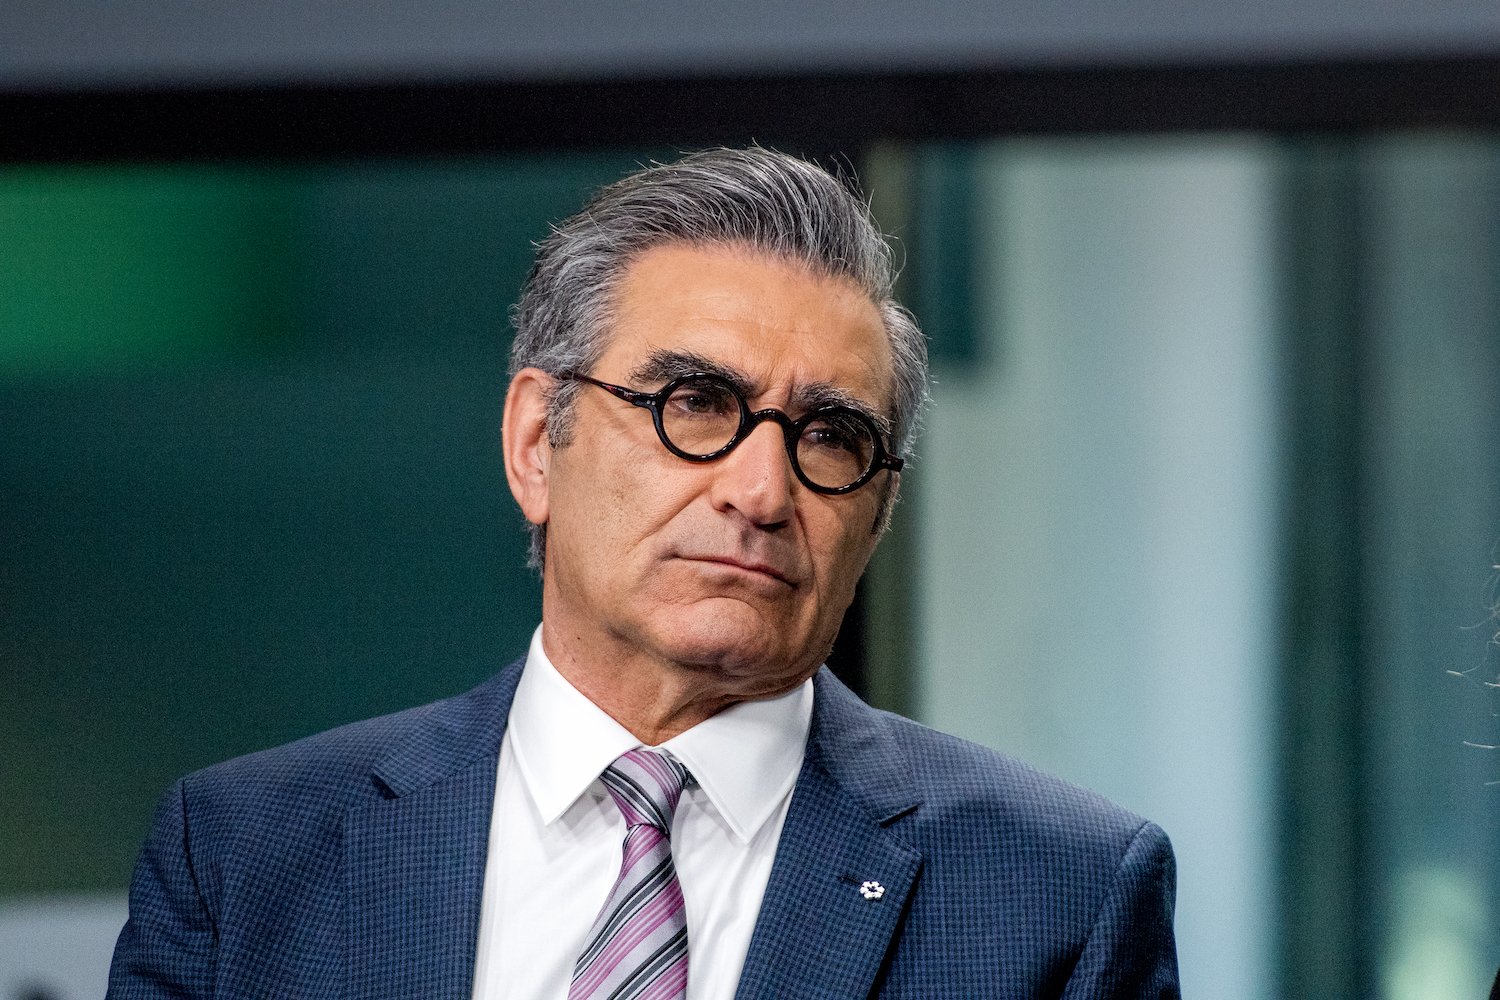 ‘Schitt’s Creek’: Chris Elliot Made Eugene Levy Break Character and Laugh During Scenes All the Time—’He Does It Intentionally’